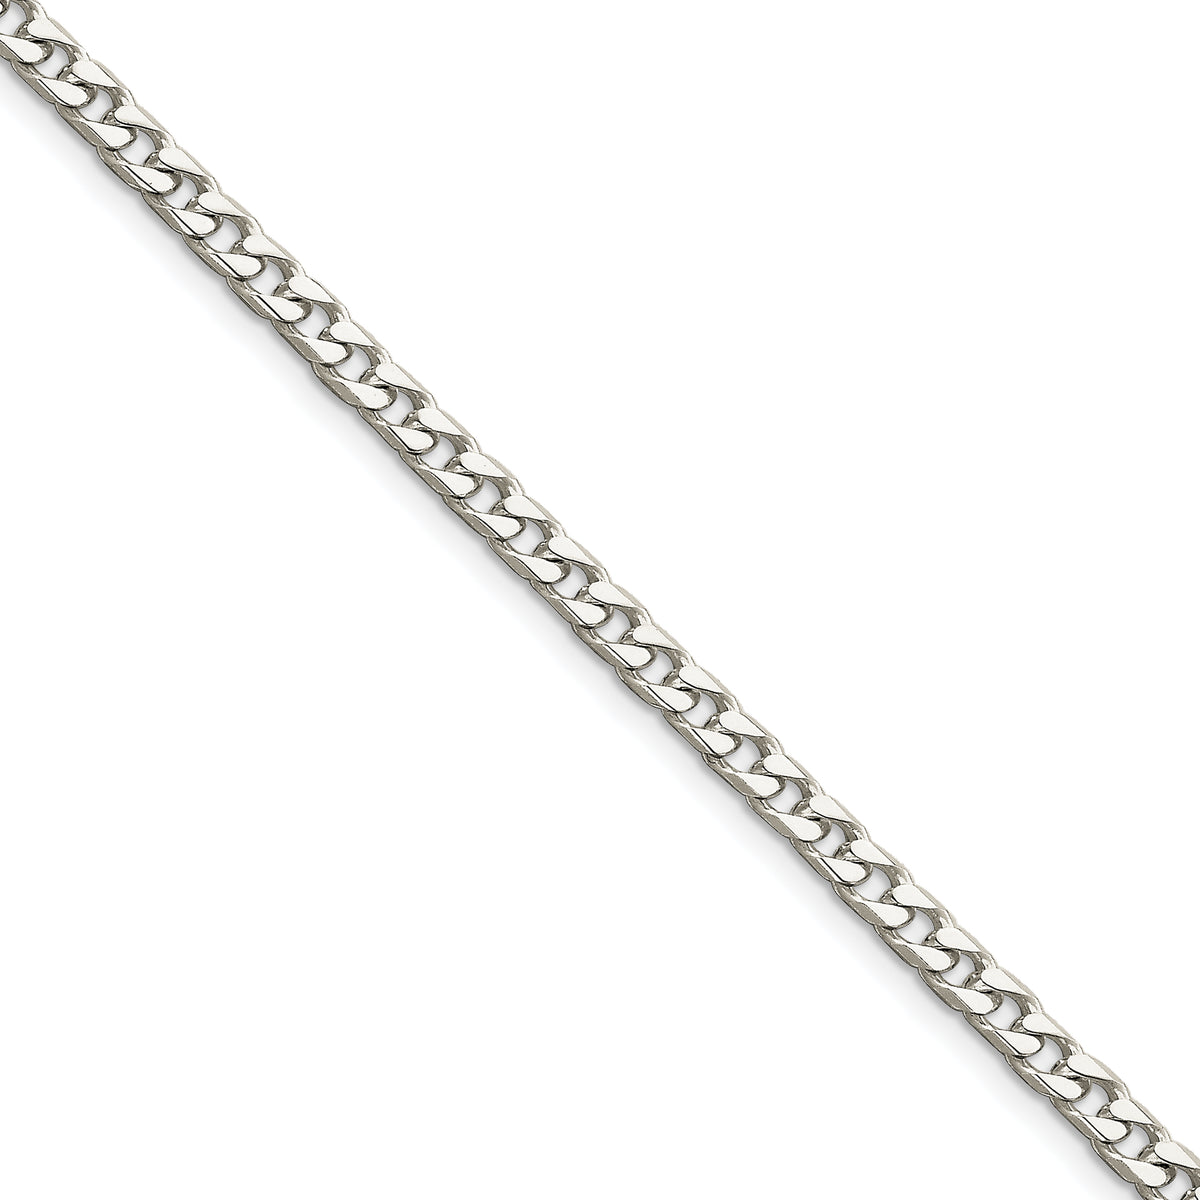 Sterling Silver Polished 5.0mm Curb Chain